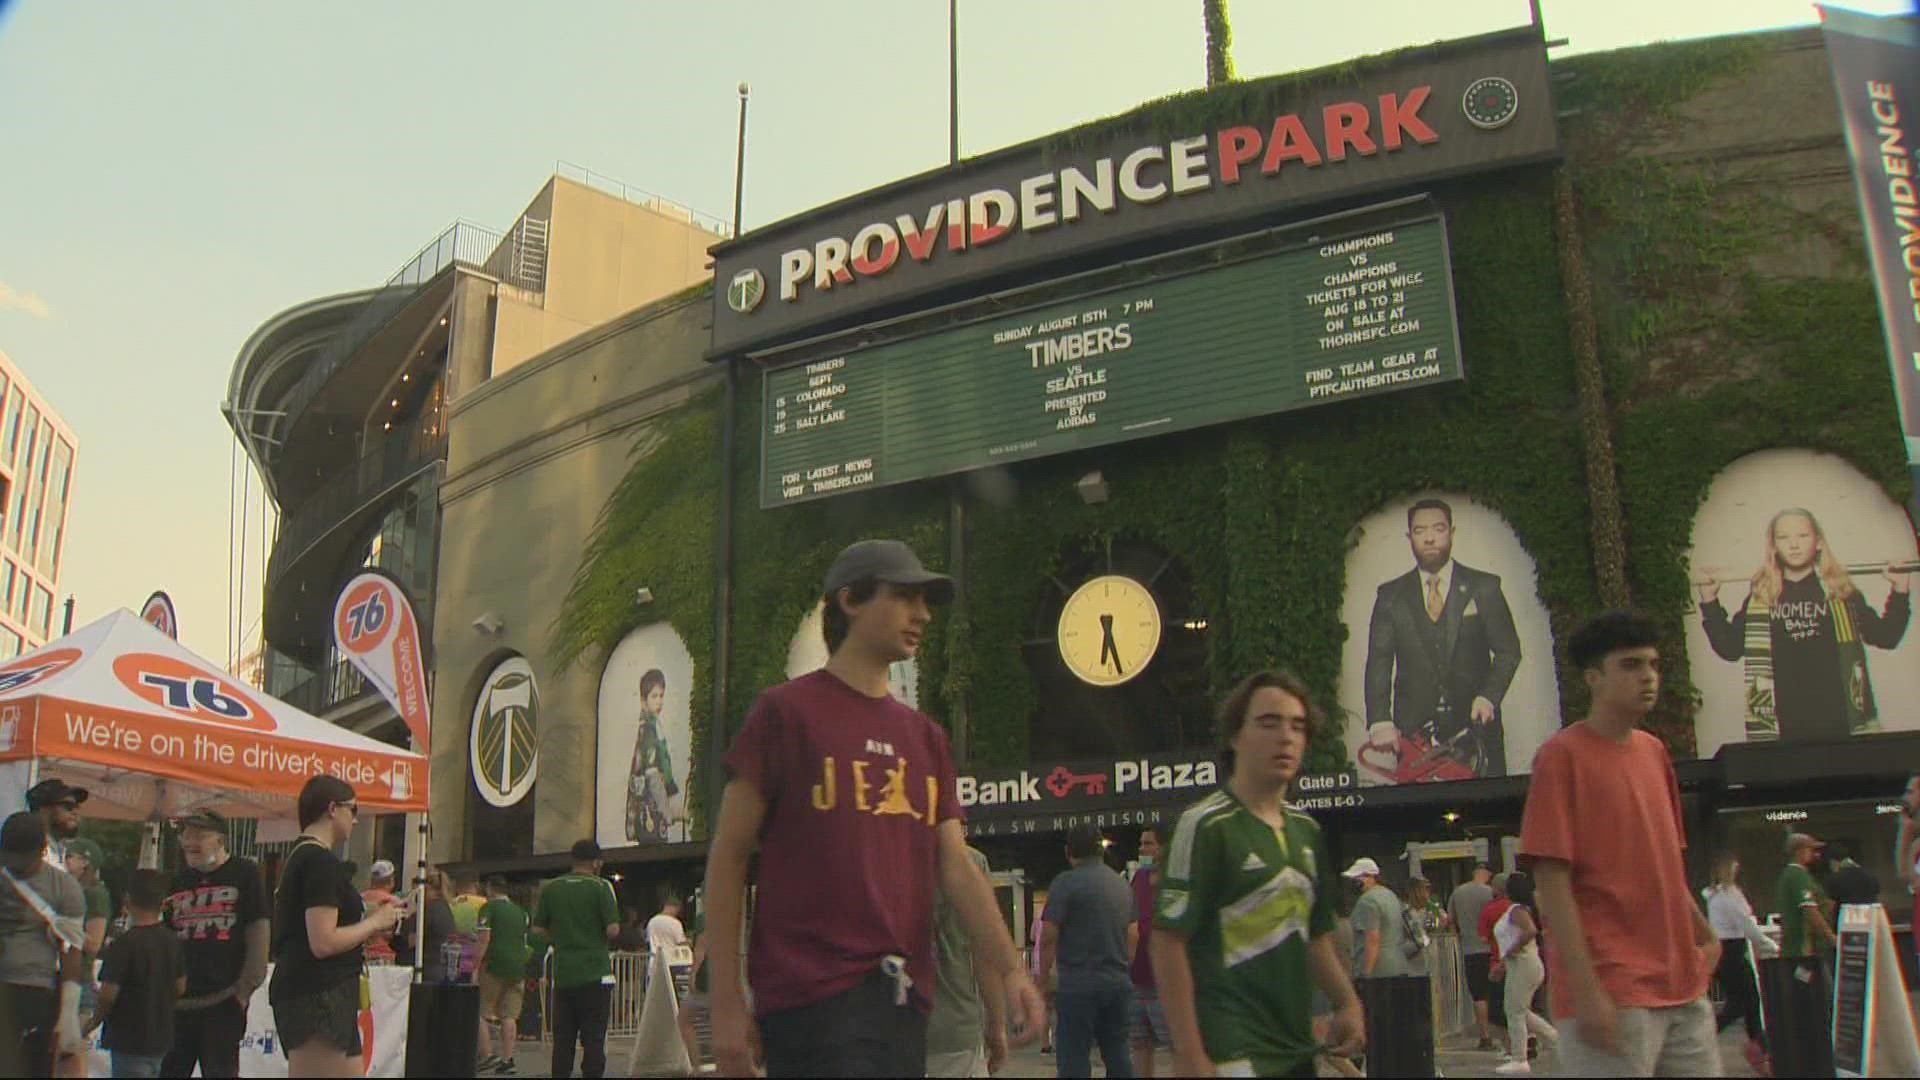 Fans will need to prove they've been vaccinated before they can cheer on the Timbers or Thorns at Providence Park, the organizations announced Tuesday.